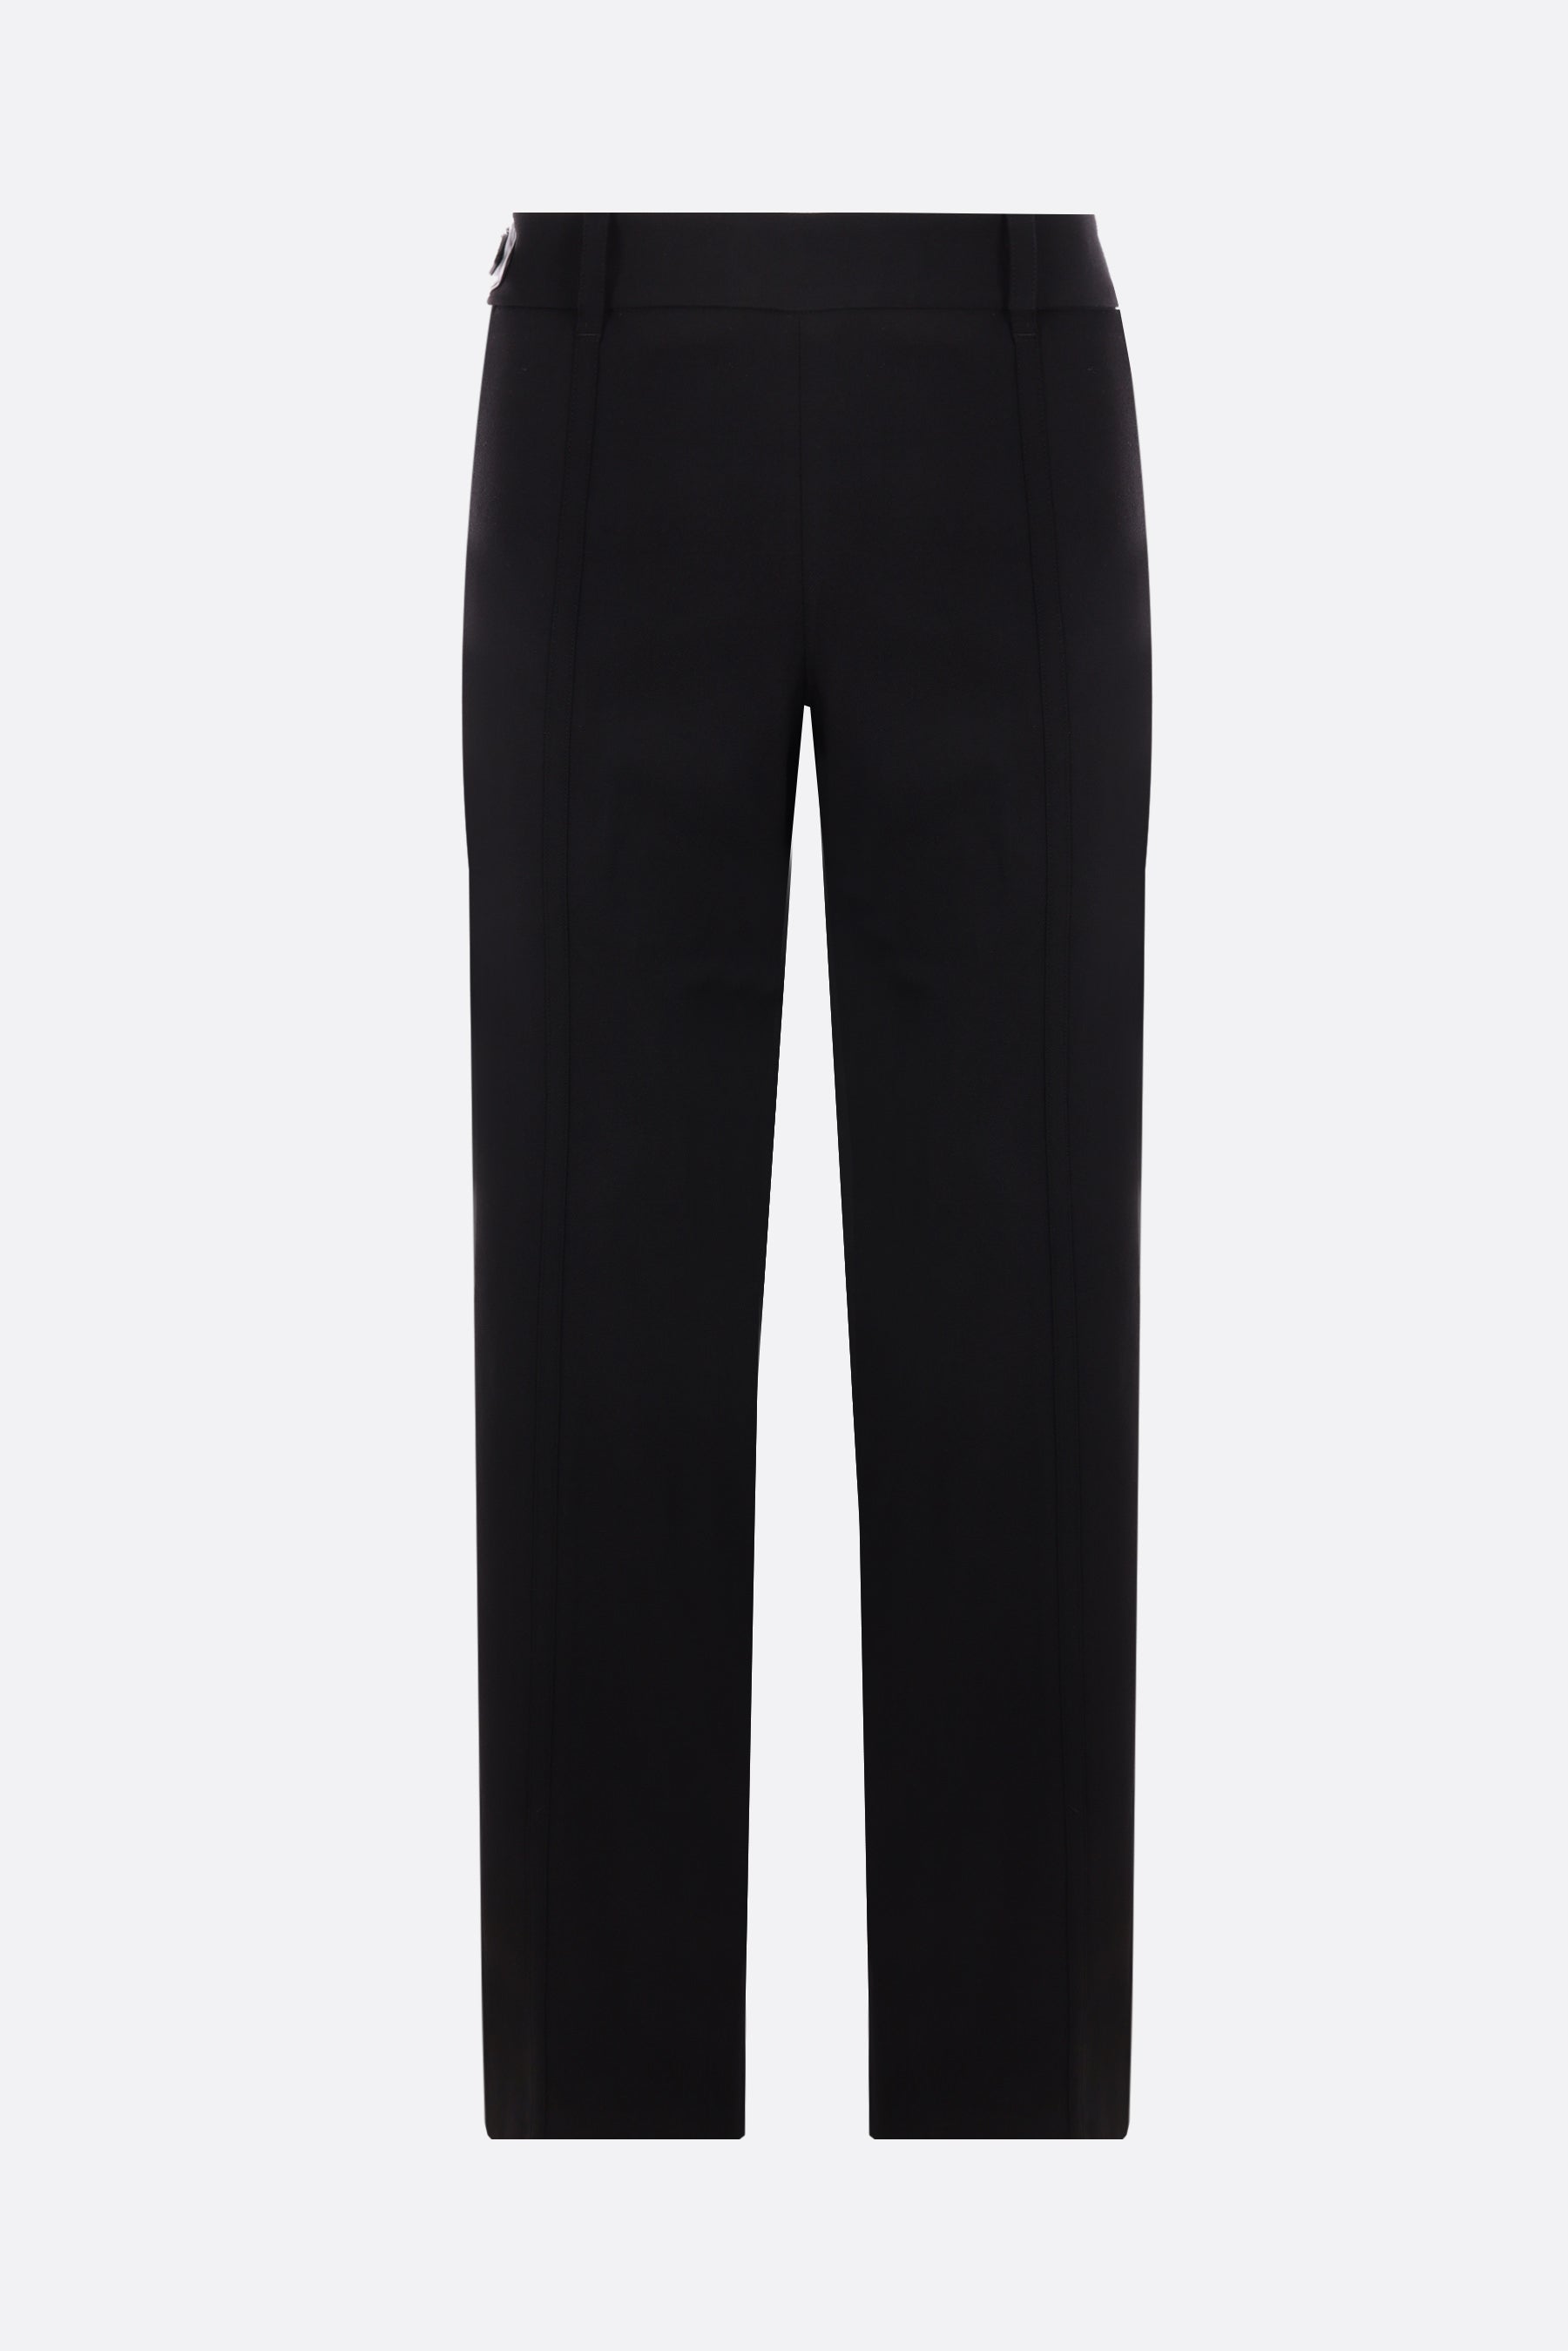 Light Grey Soho Suit Pants in Pure S120's Tropical Wool